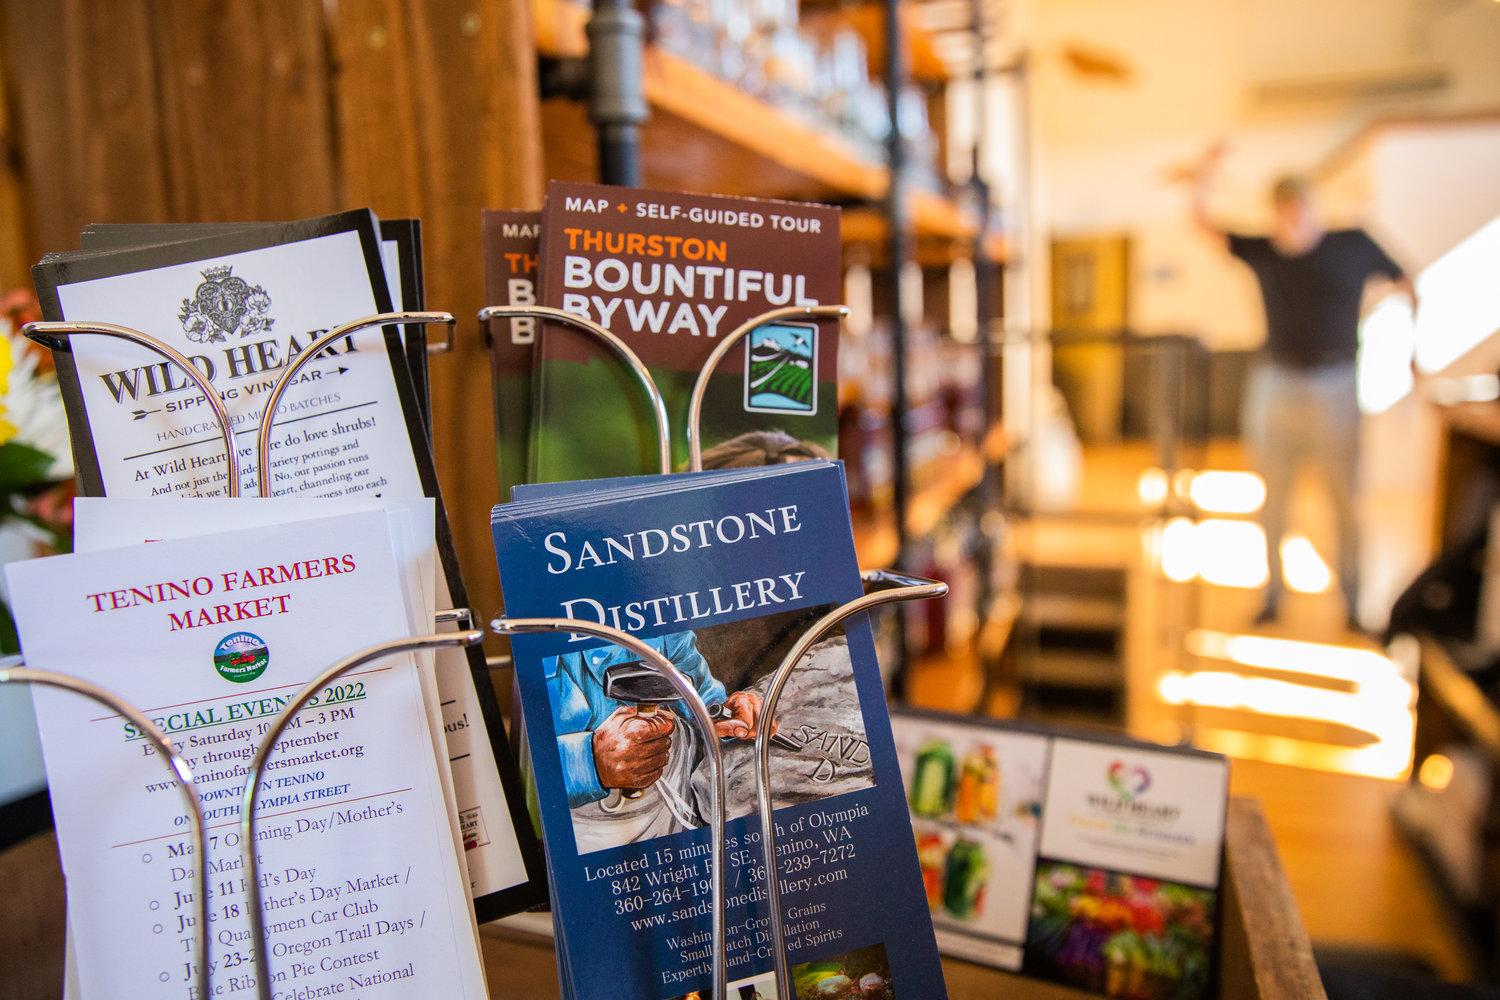 Local flyers are displayed inside the Sandstone Distillery Tasting Room in downtown Tenino on Thursday.